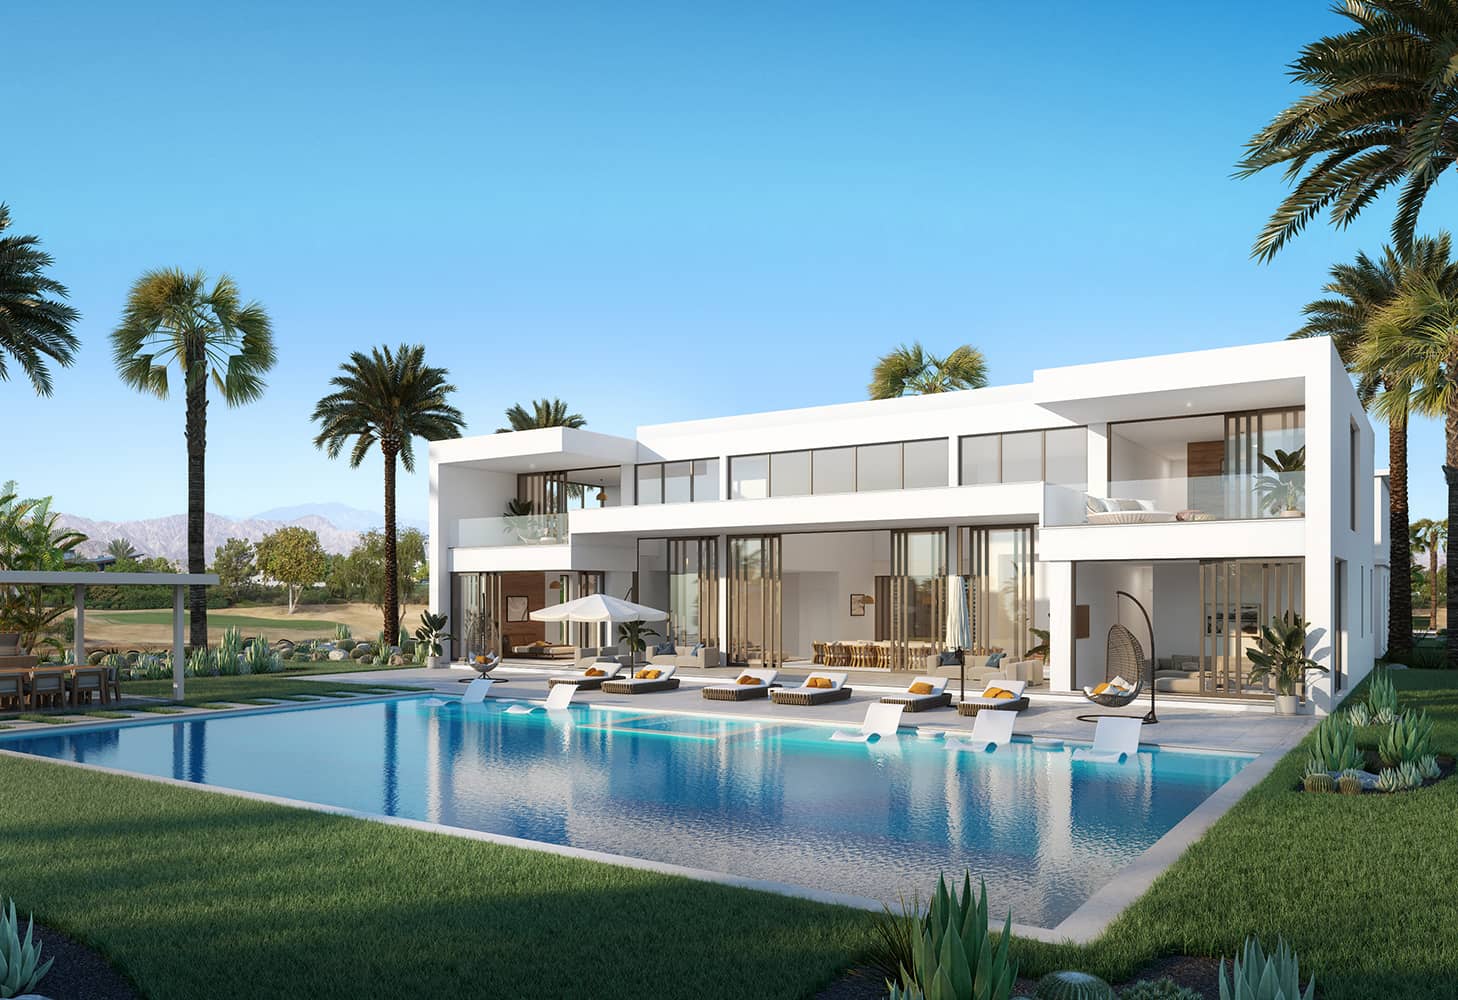 A 3D architectural rendering of a modern home with a swimming pool and palm trees.